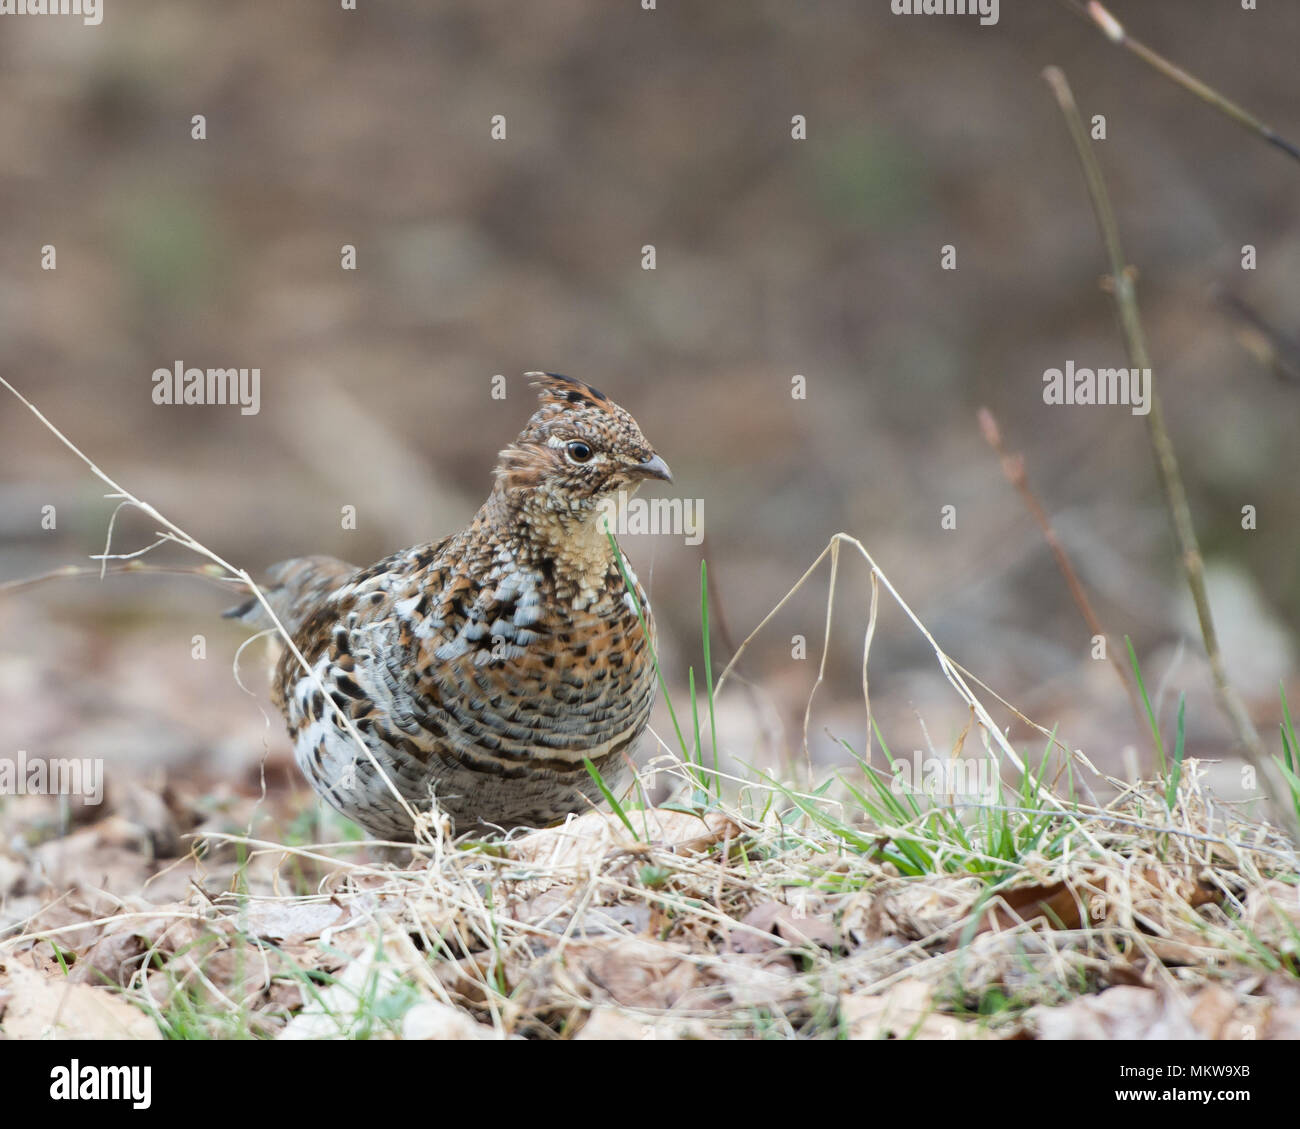 A ruffed grouse, Bonasa umbellus, foraging on the forest floor in the Adirondack Mountains, NY. Stock Photo